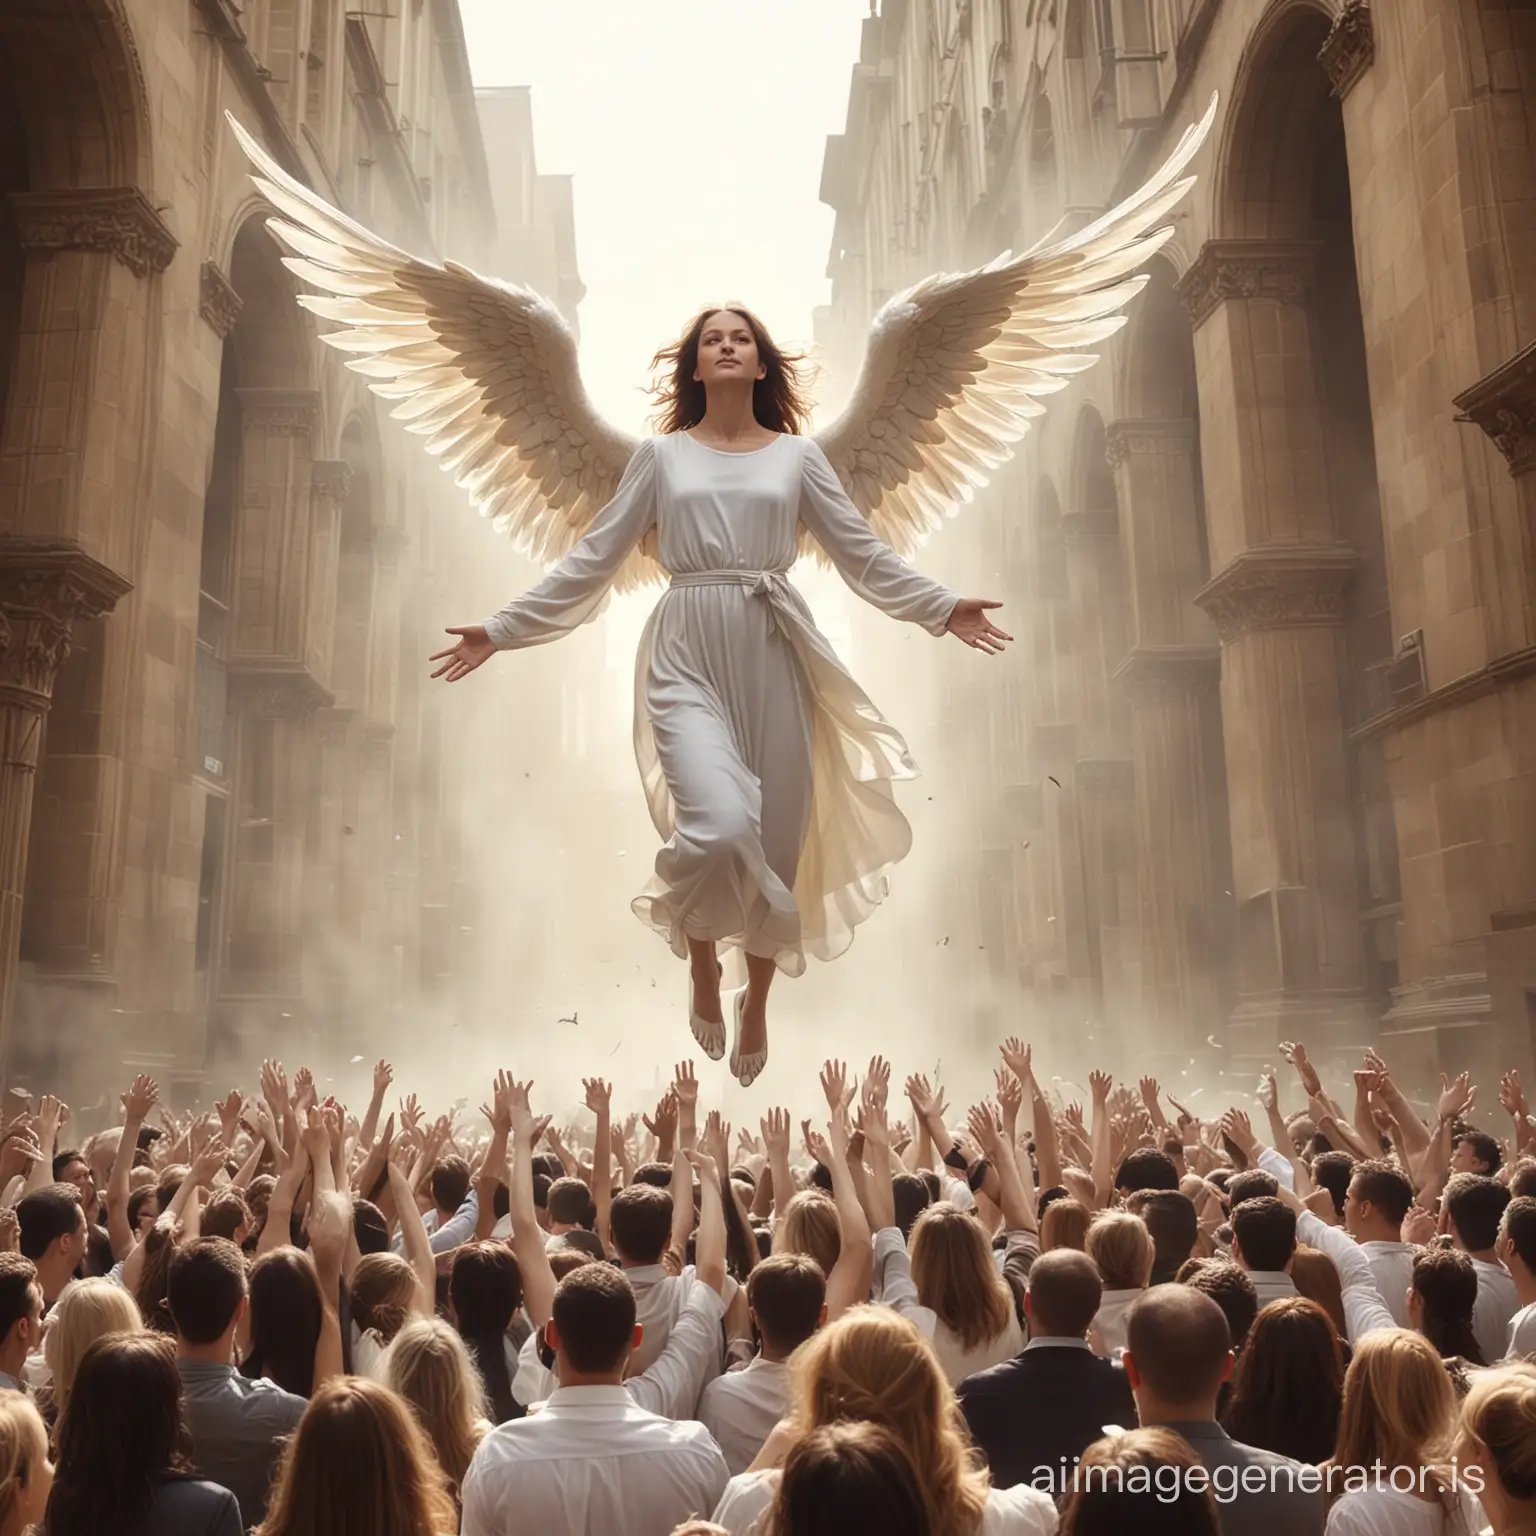 ANGEL FLYING AROUND THE PEOPLE